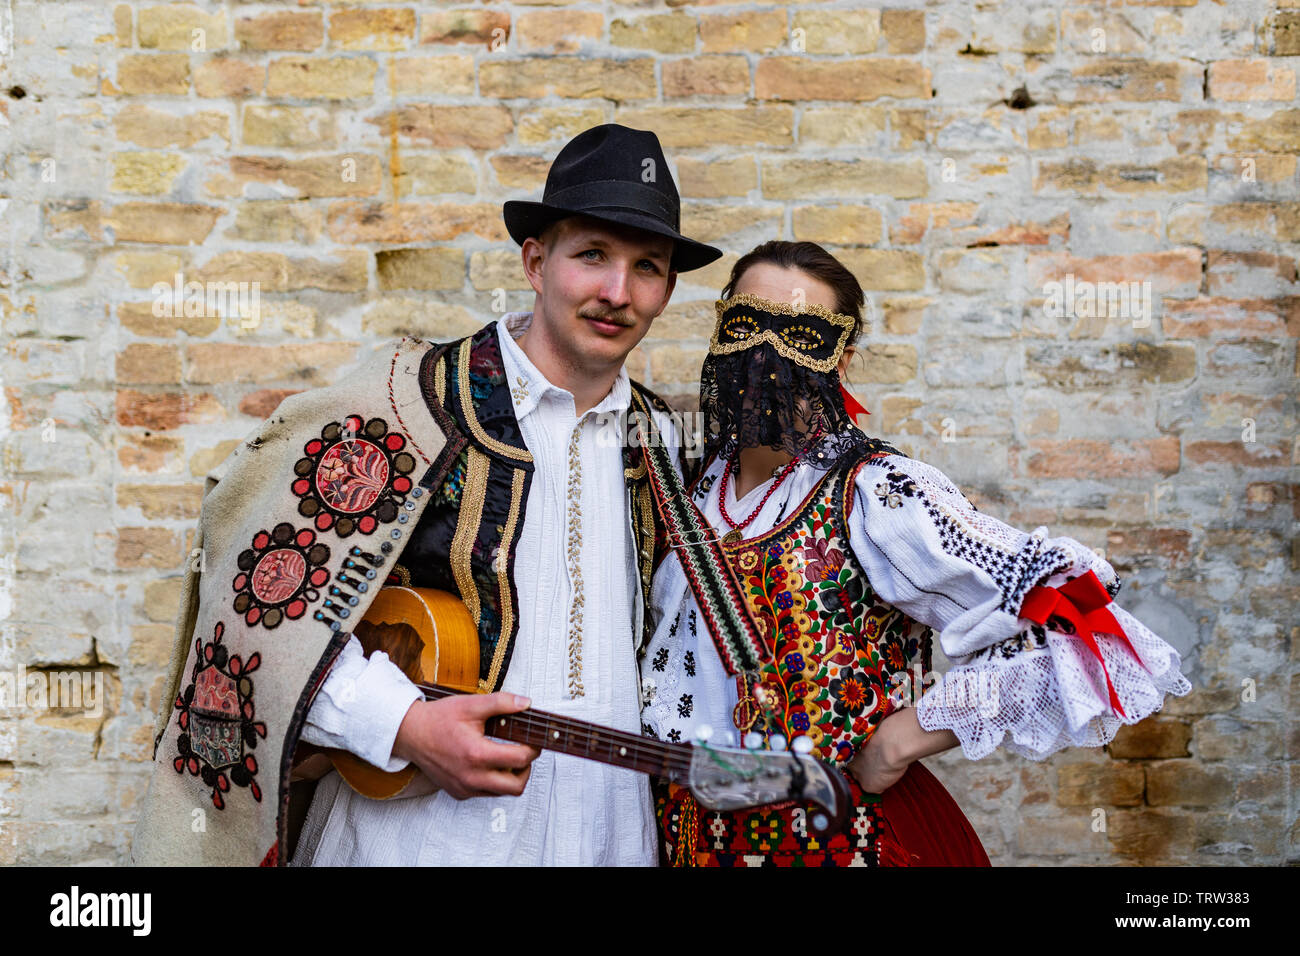 Traditional, UNESCO-protected "Buso" heritage of Mohacs, Hungary Stock Photo